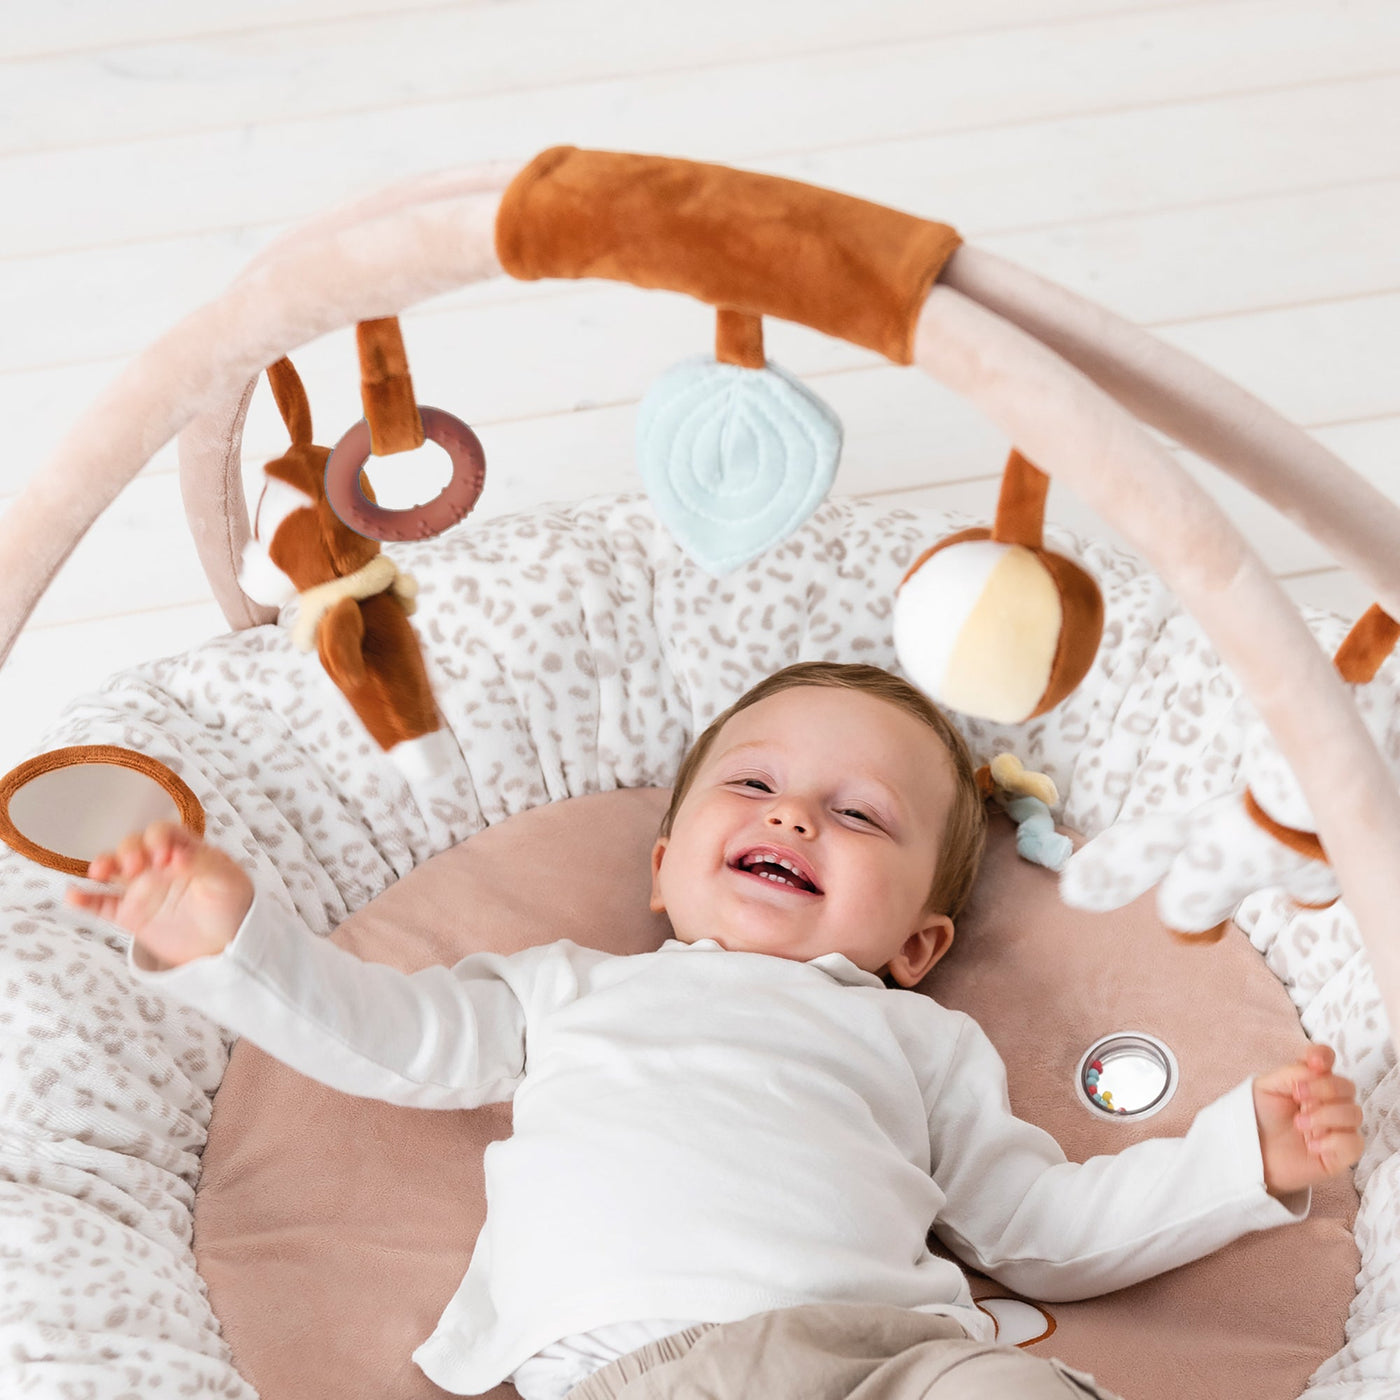 Stuffed Playmat With Arches-Nattou-Yes Bebe